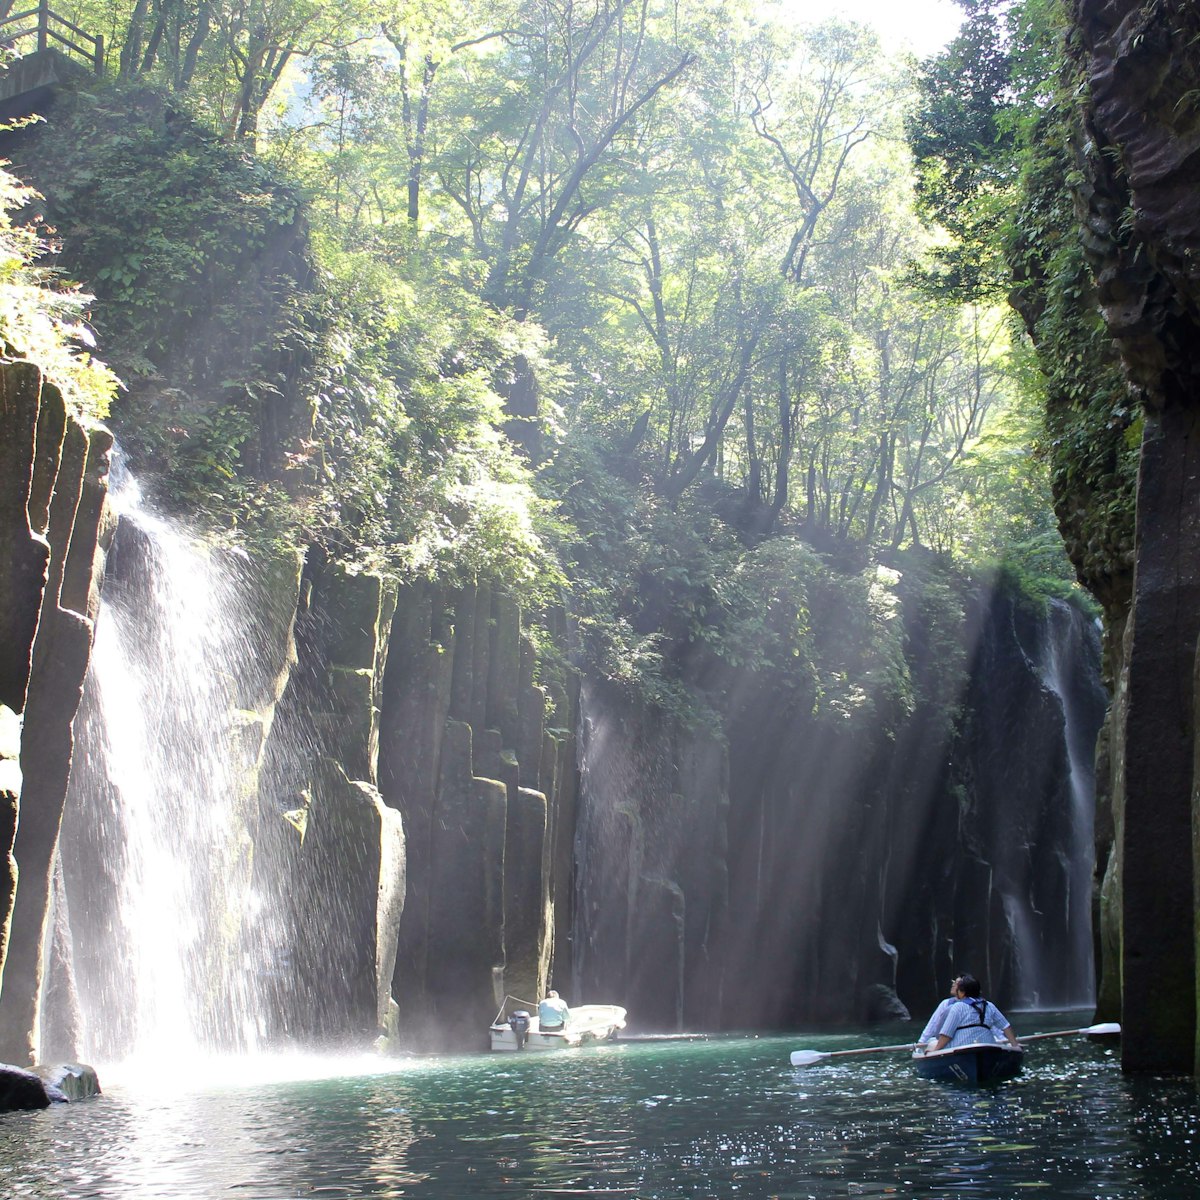 Takachiho-kyou(Takachiho Valley); Shutterstock ID 347589899; Your name (First / Last): Laura Crawford; GL account no.: 65050; Netsuite department name: Online Editorial; Full Product or Project name including edition: Kyushu destination page online